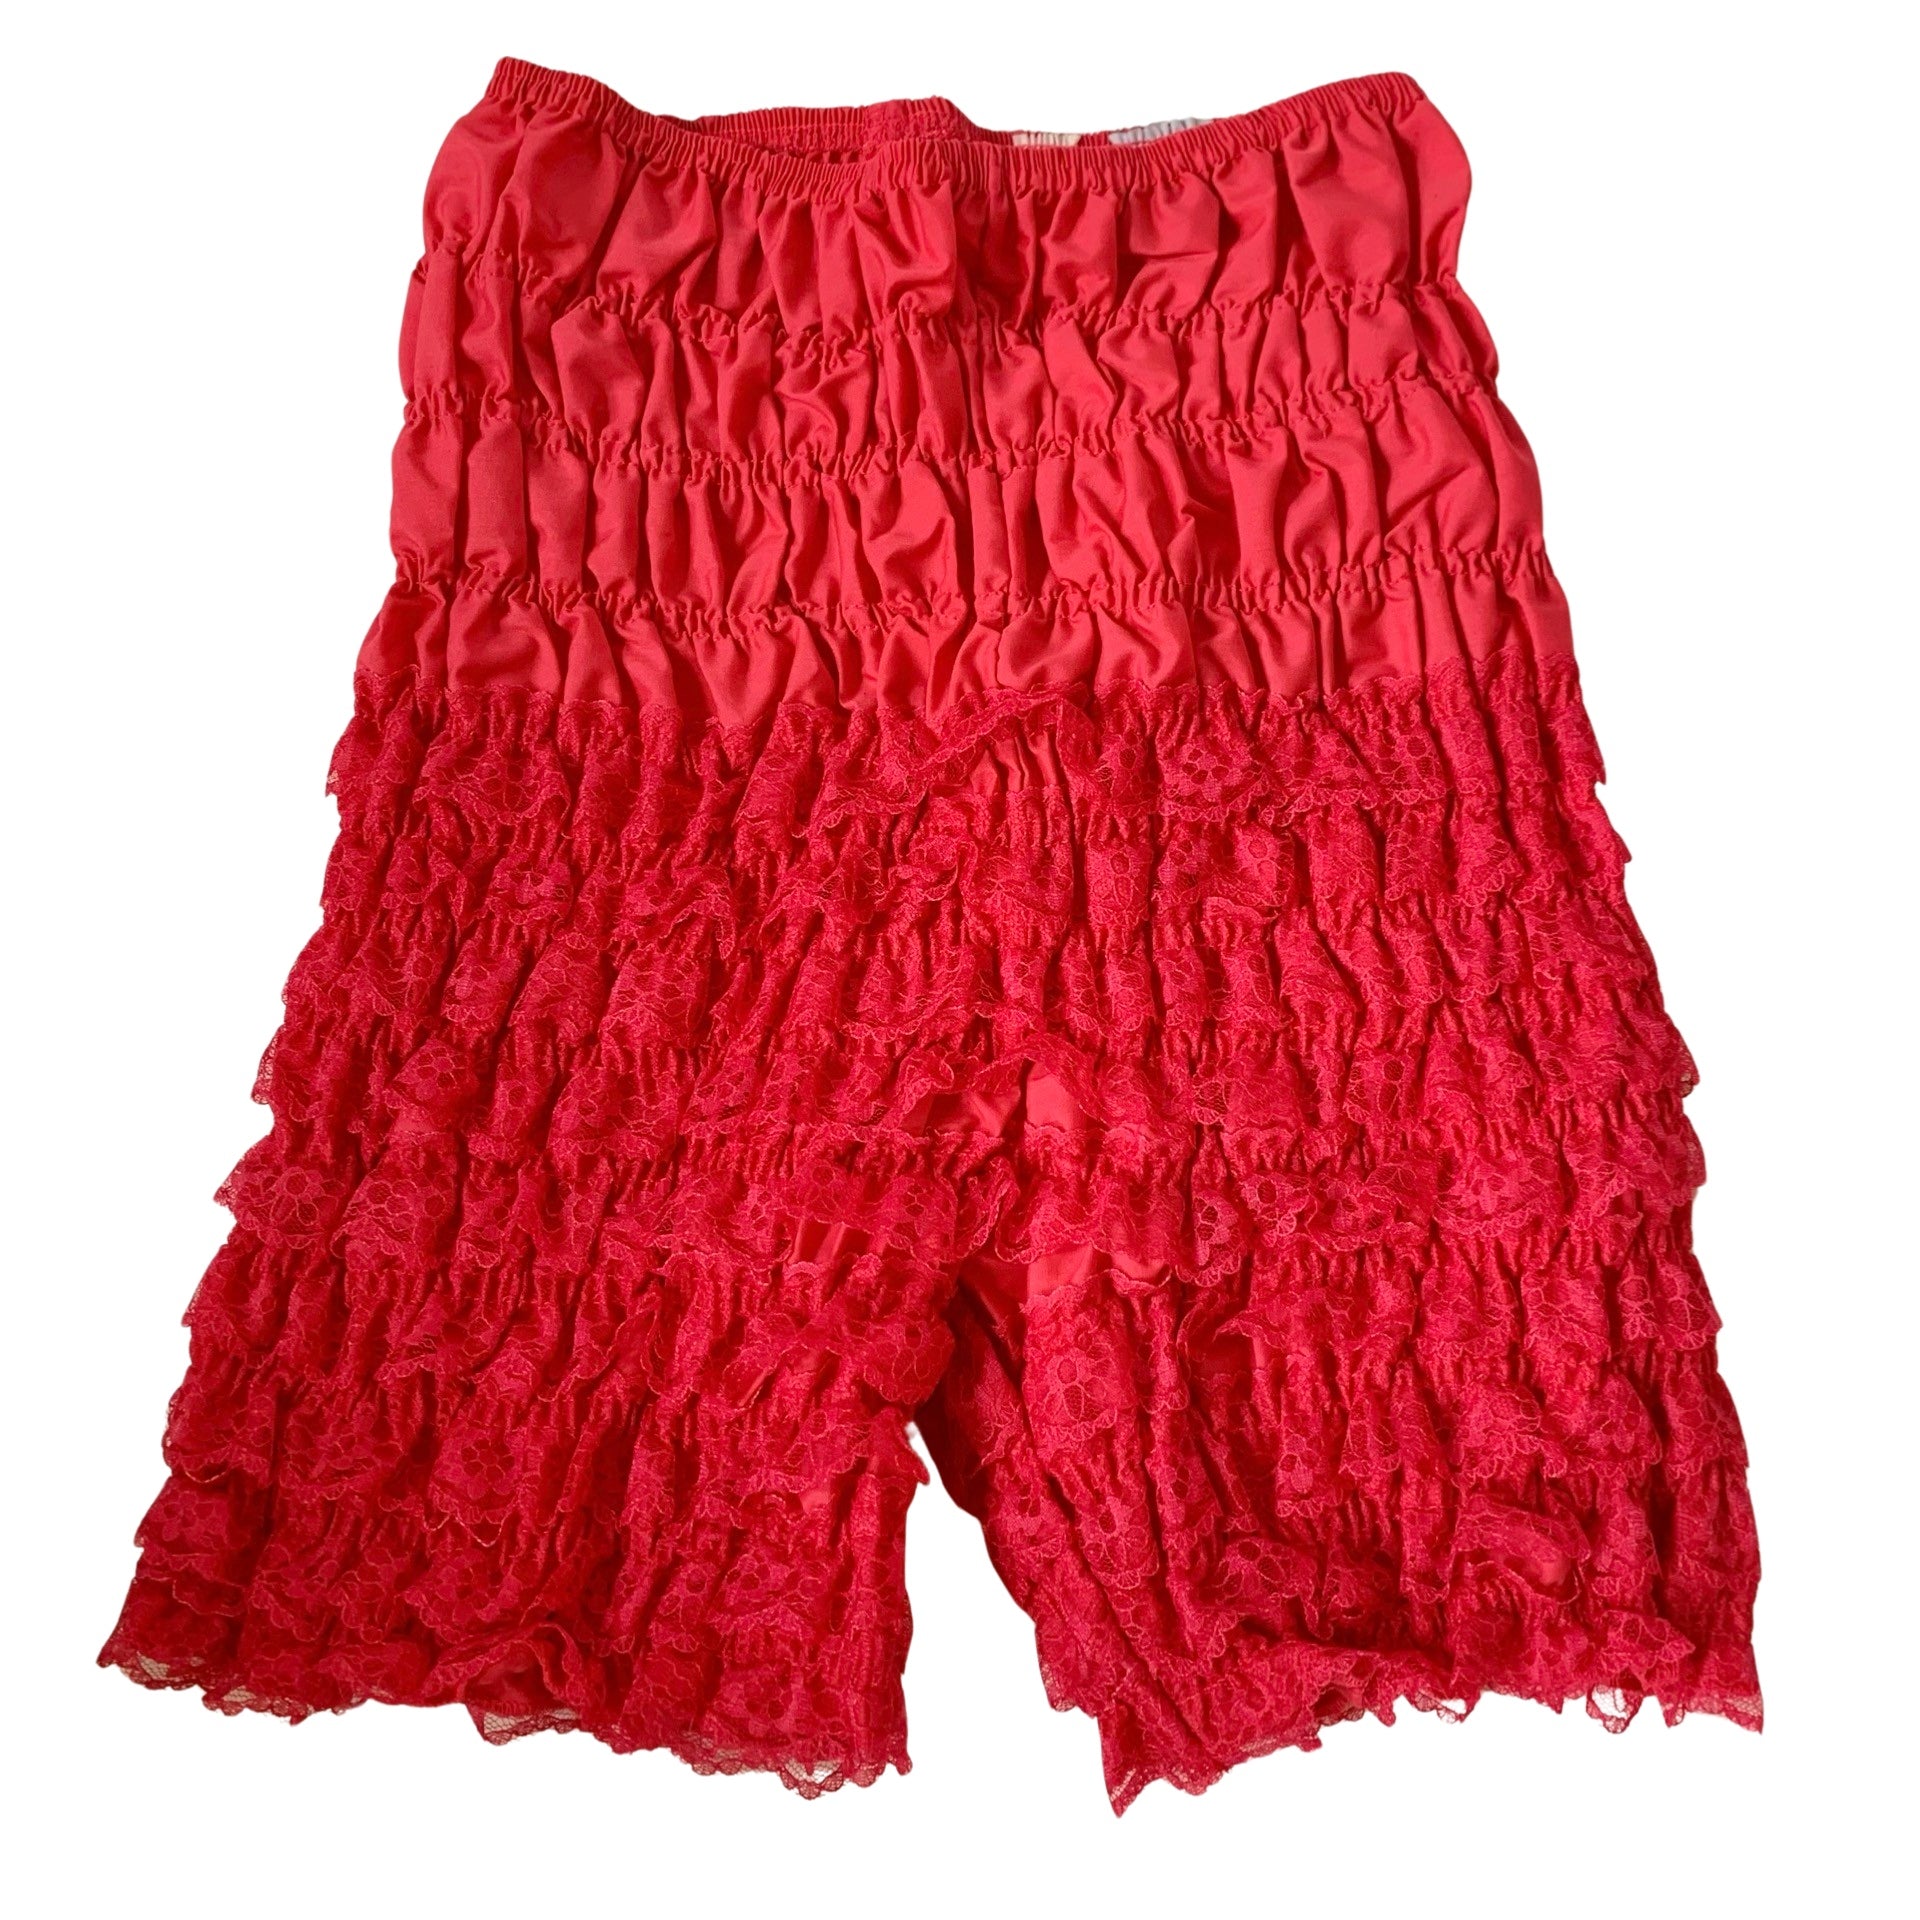 Vintage Hot Pink Ruffle Bloomers (XS/S)